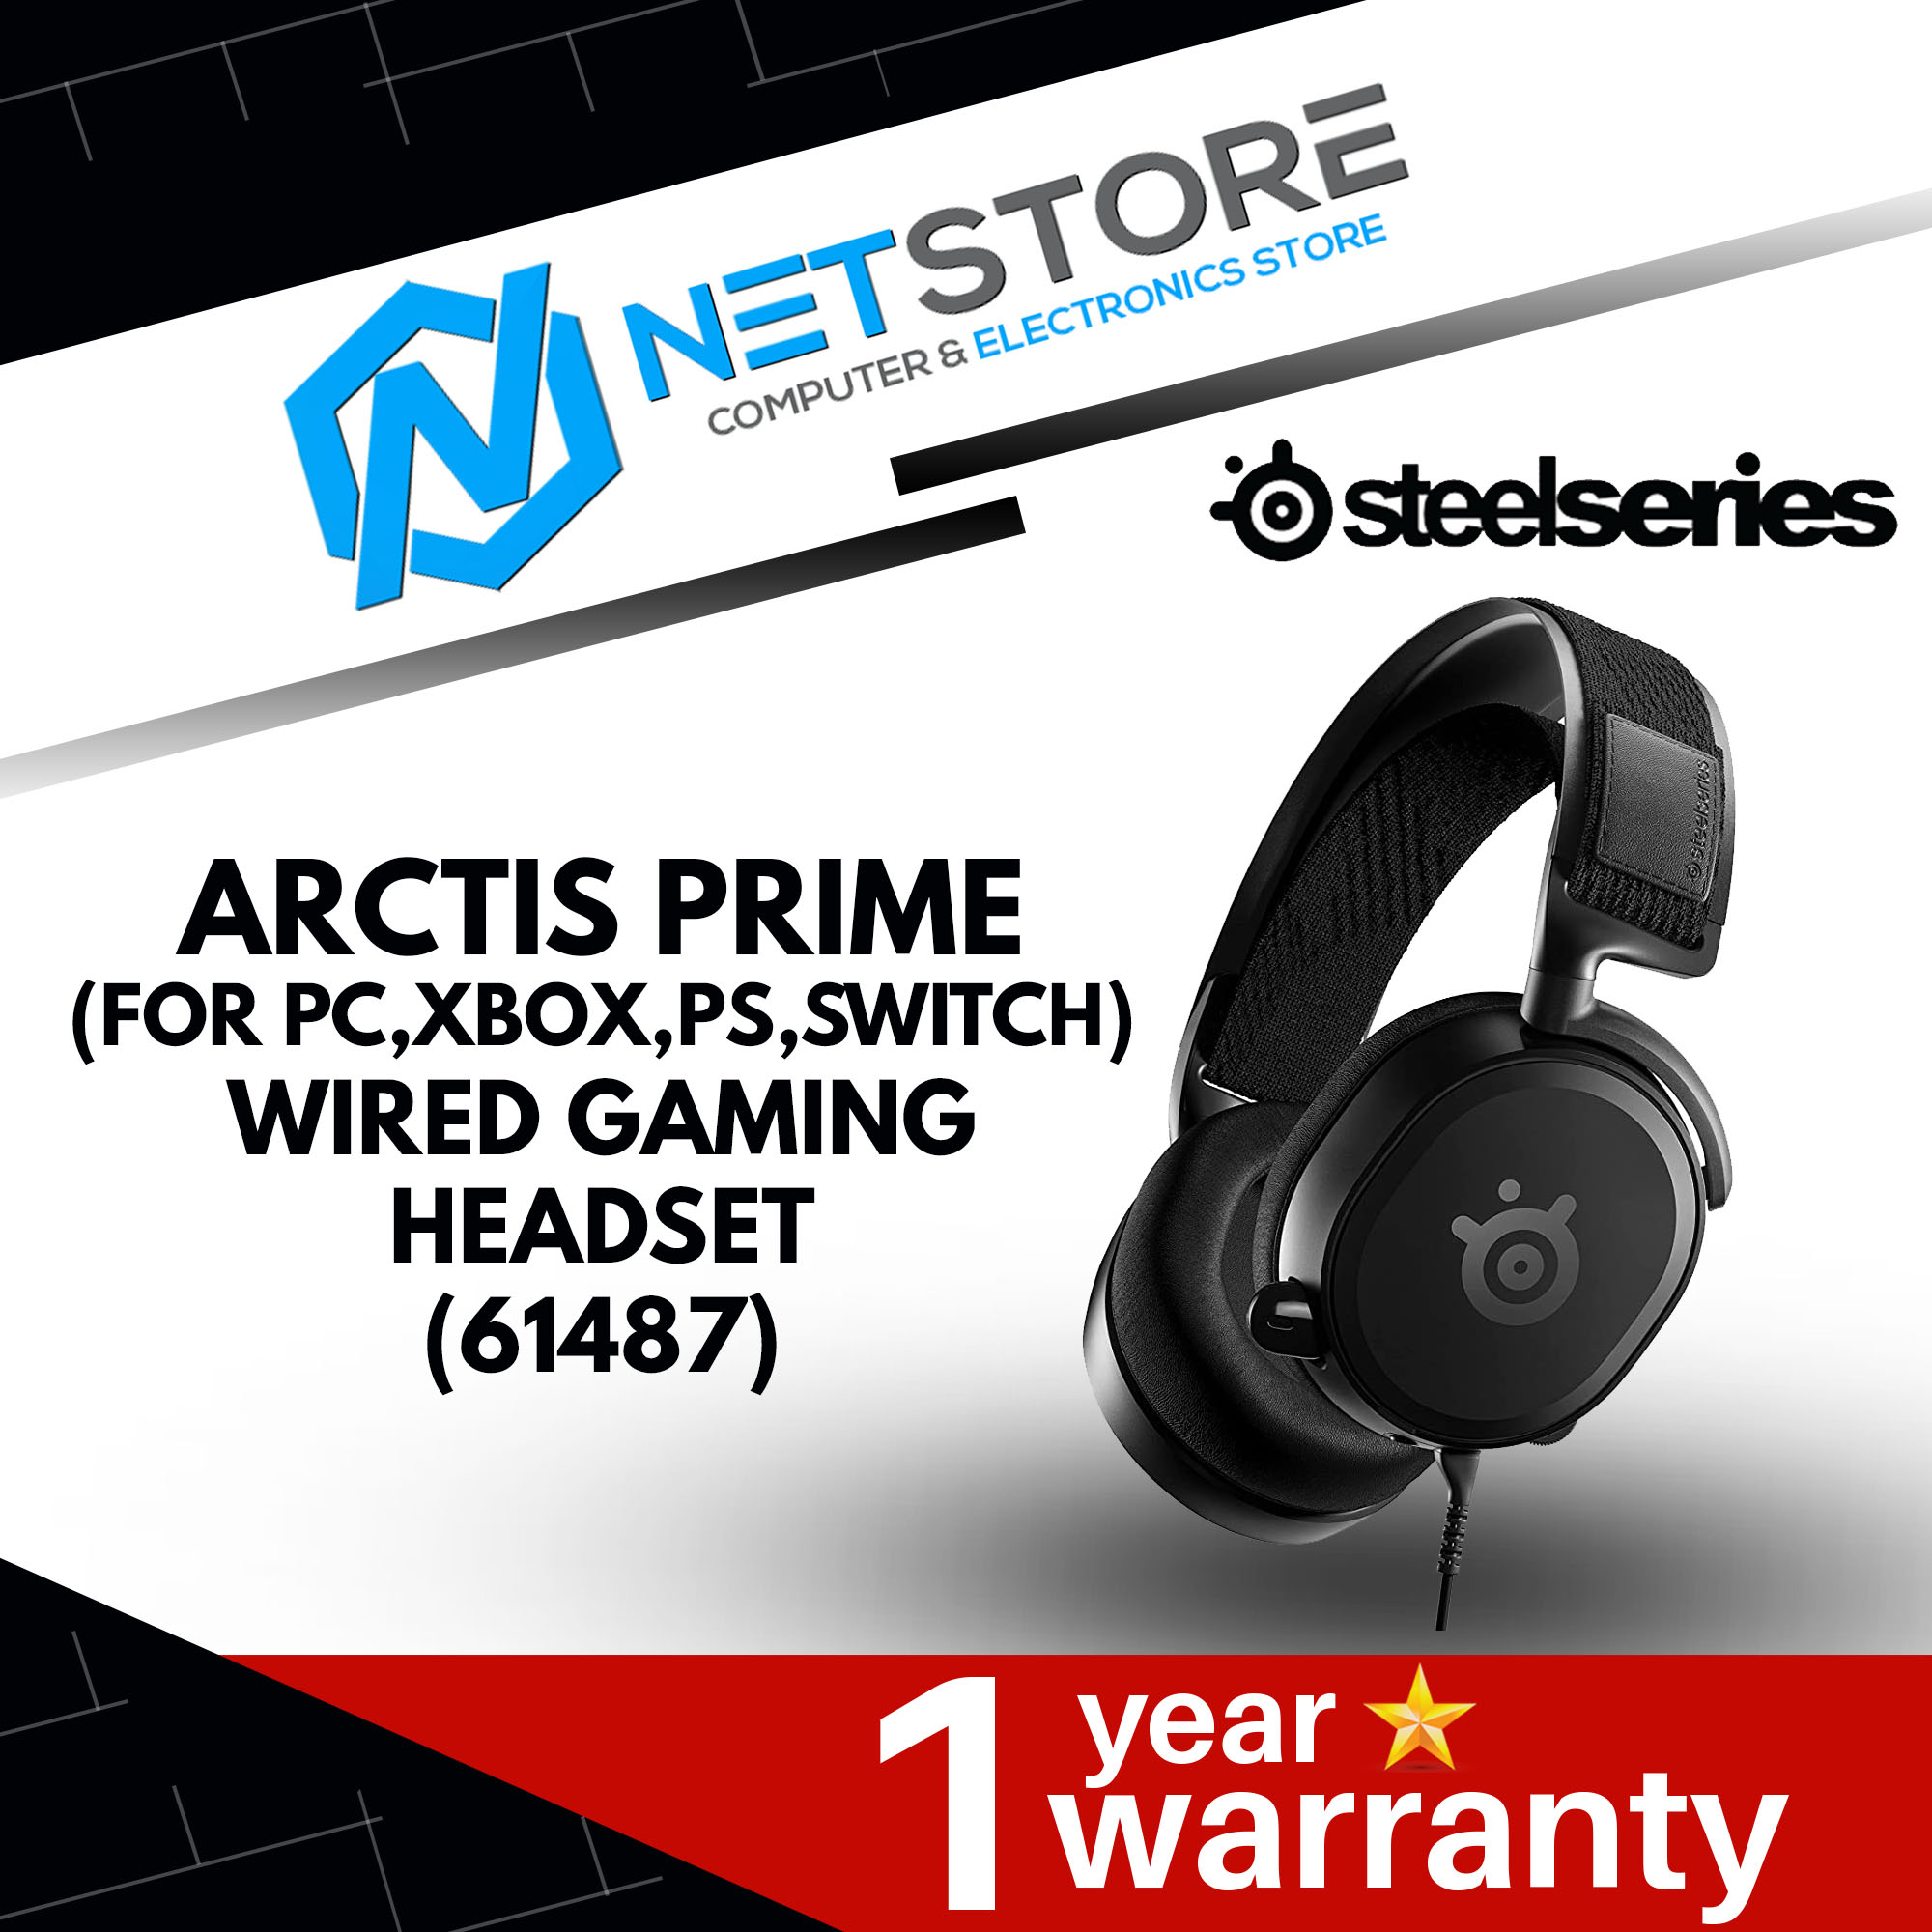 STEELSERIES ARCTIS PRIME (FOR PC,XBOX,PS,SWITCH) WIRED GAMING HEADSET